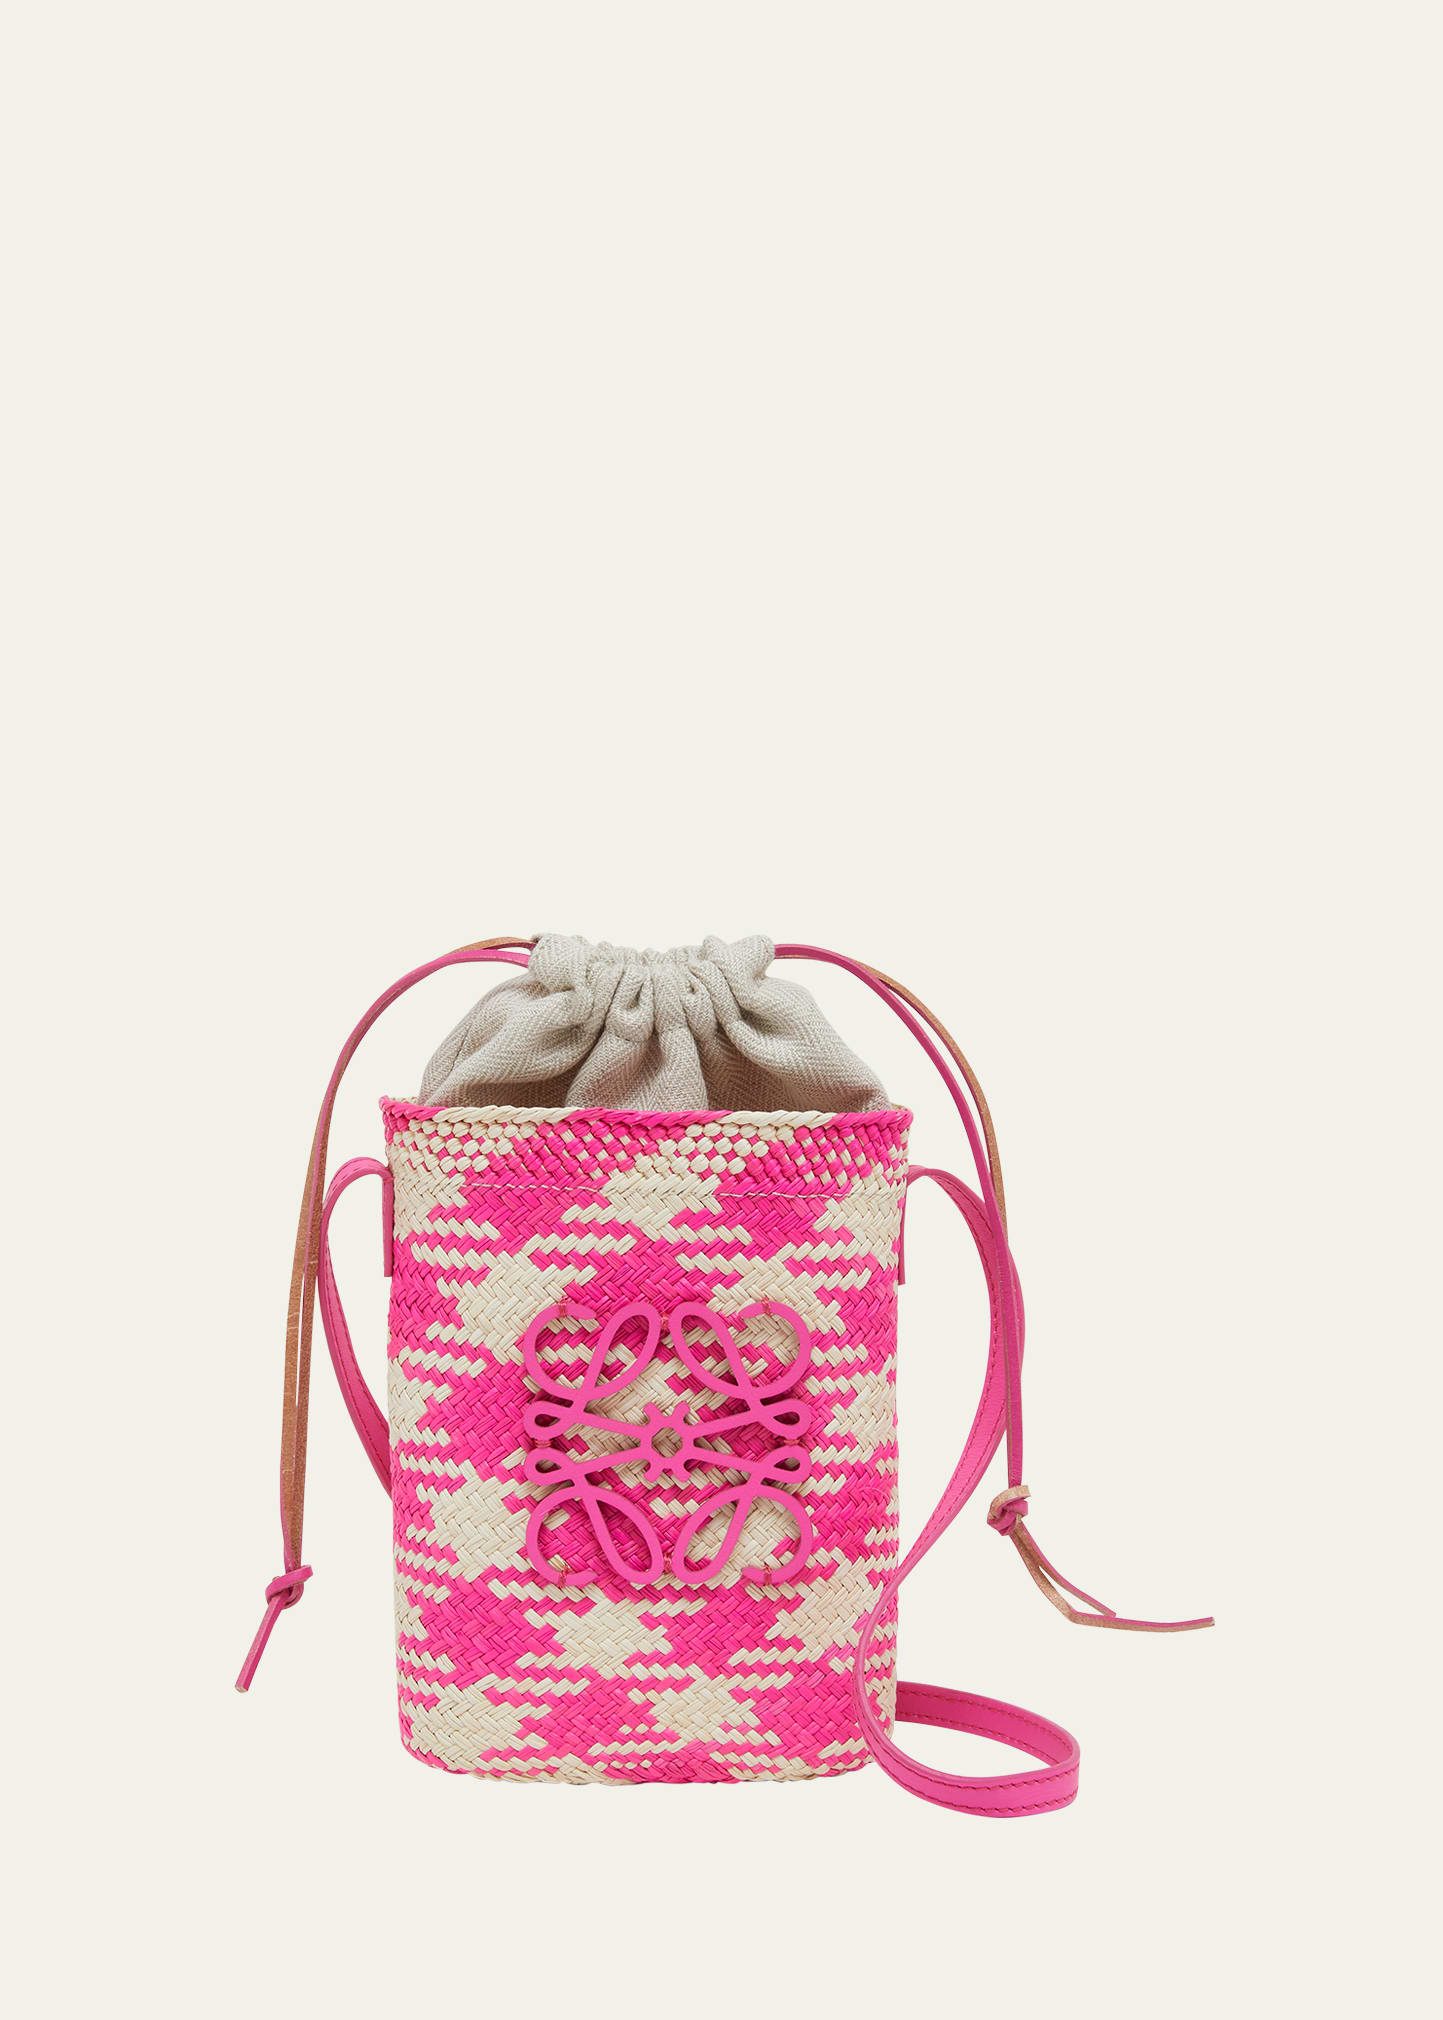 Shop Loewe X Paula's Ibiza Iraca Pocket In Checkered Iraca Palm With Leather Strap In Natural/fuchsia